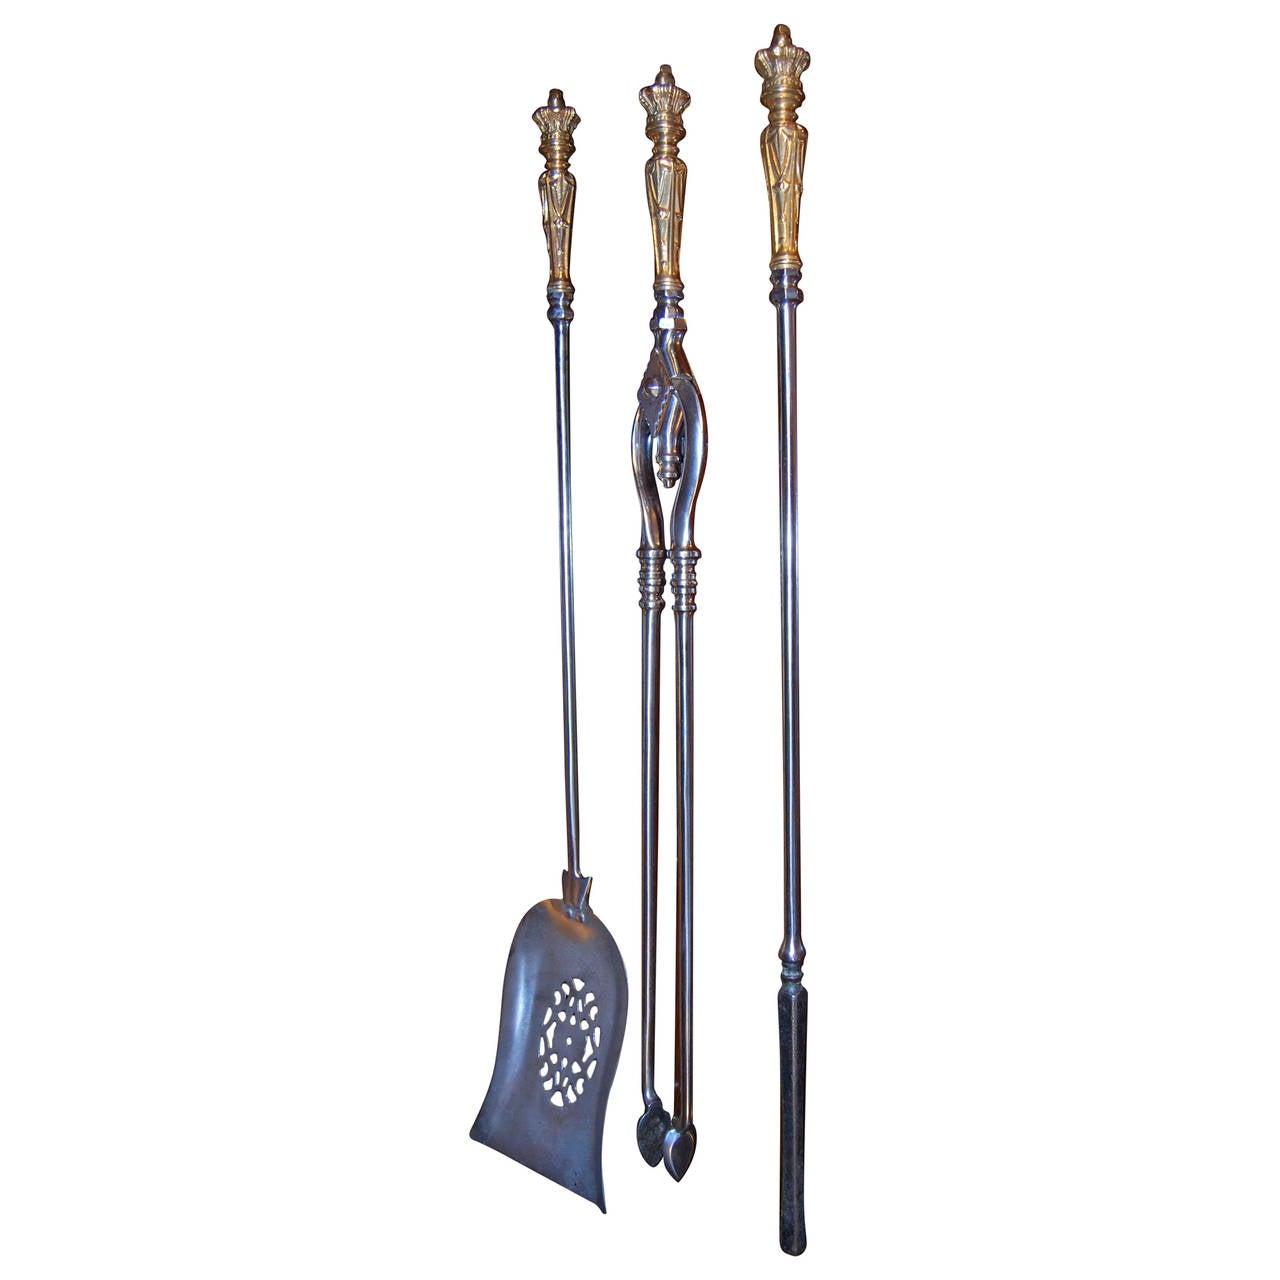 A set of three mid-19th century brass and steel fire irons comprising a shovel, pair of tongs and poker all surmounted with brass handles decorated with Crown finials.